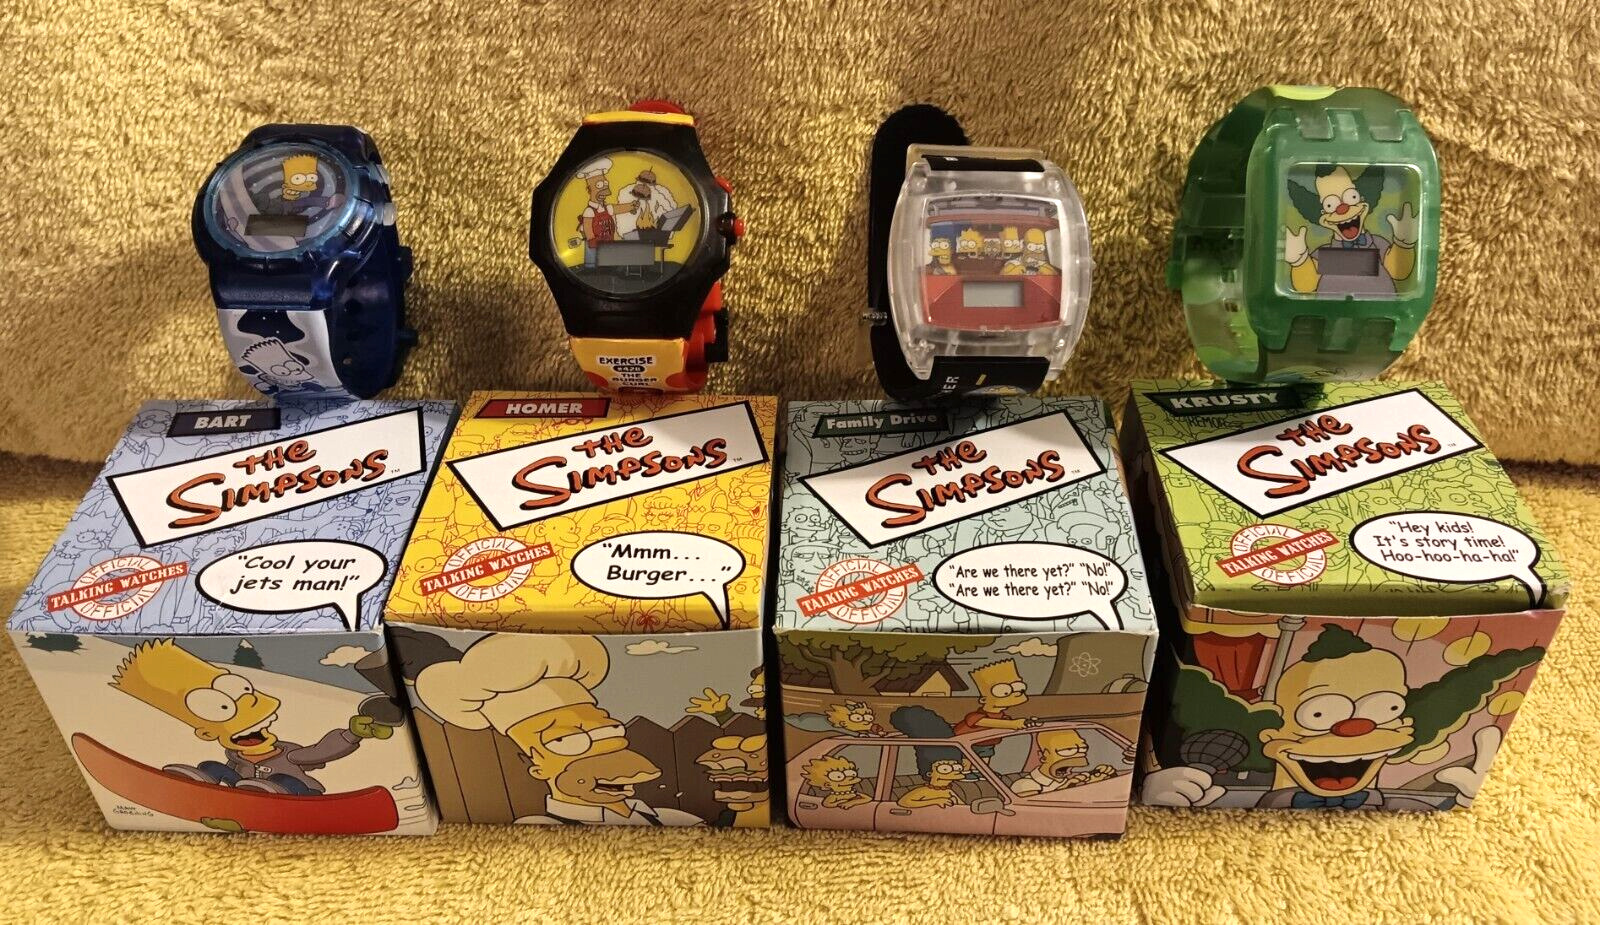 The Simpsons - talking watches 2002 FULL SET OF 4 - Burger King collectible NEW